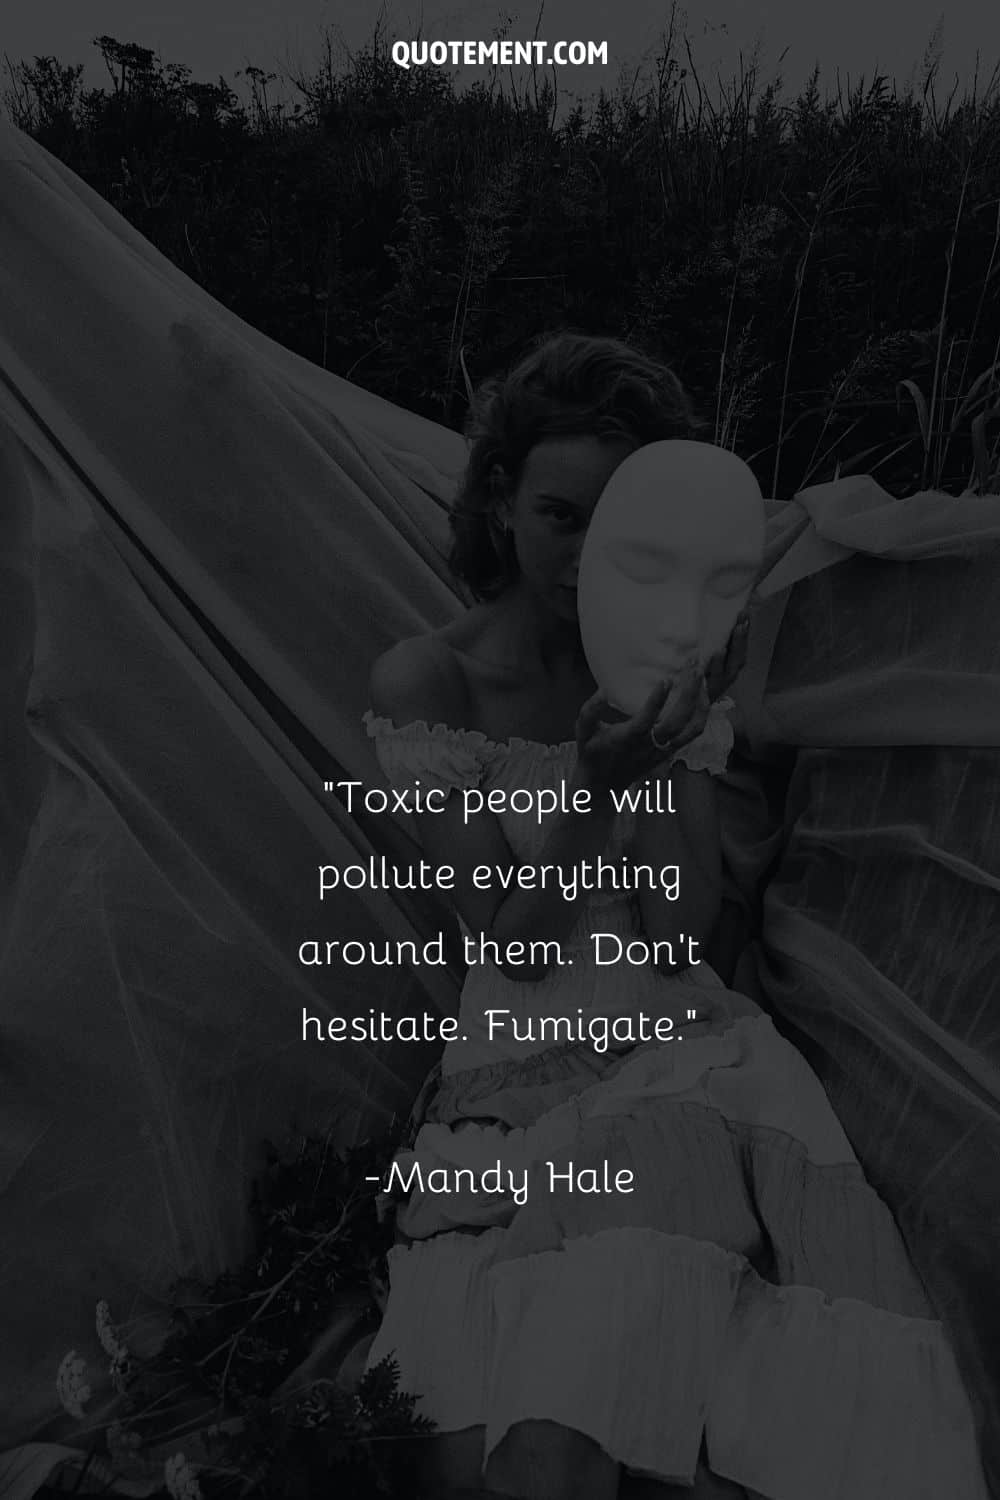 girl in white dress image representing quote on toxic people